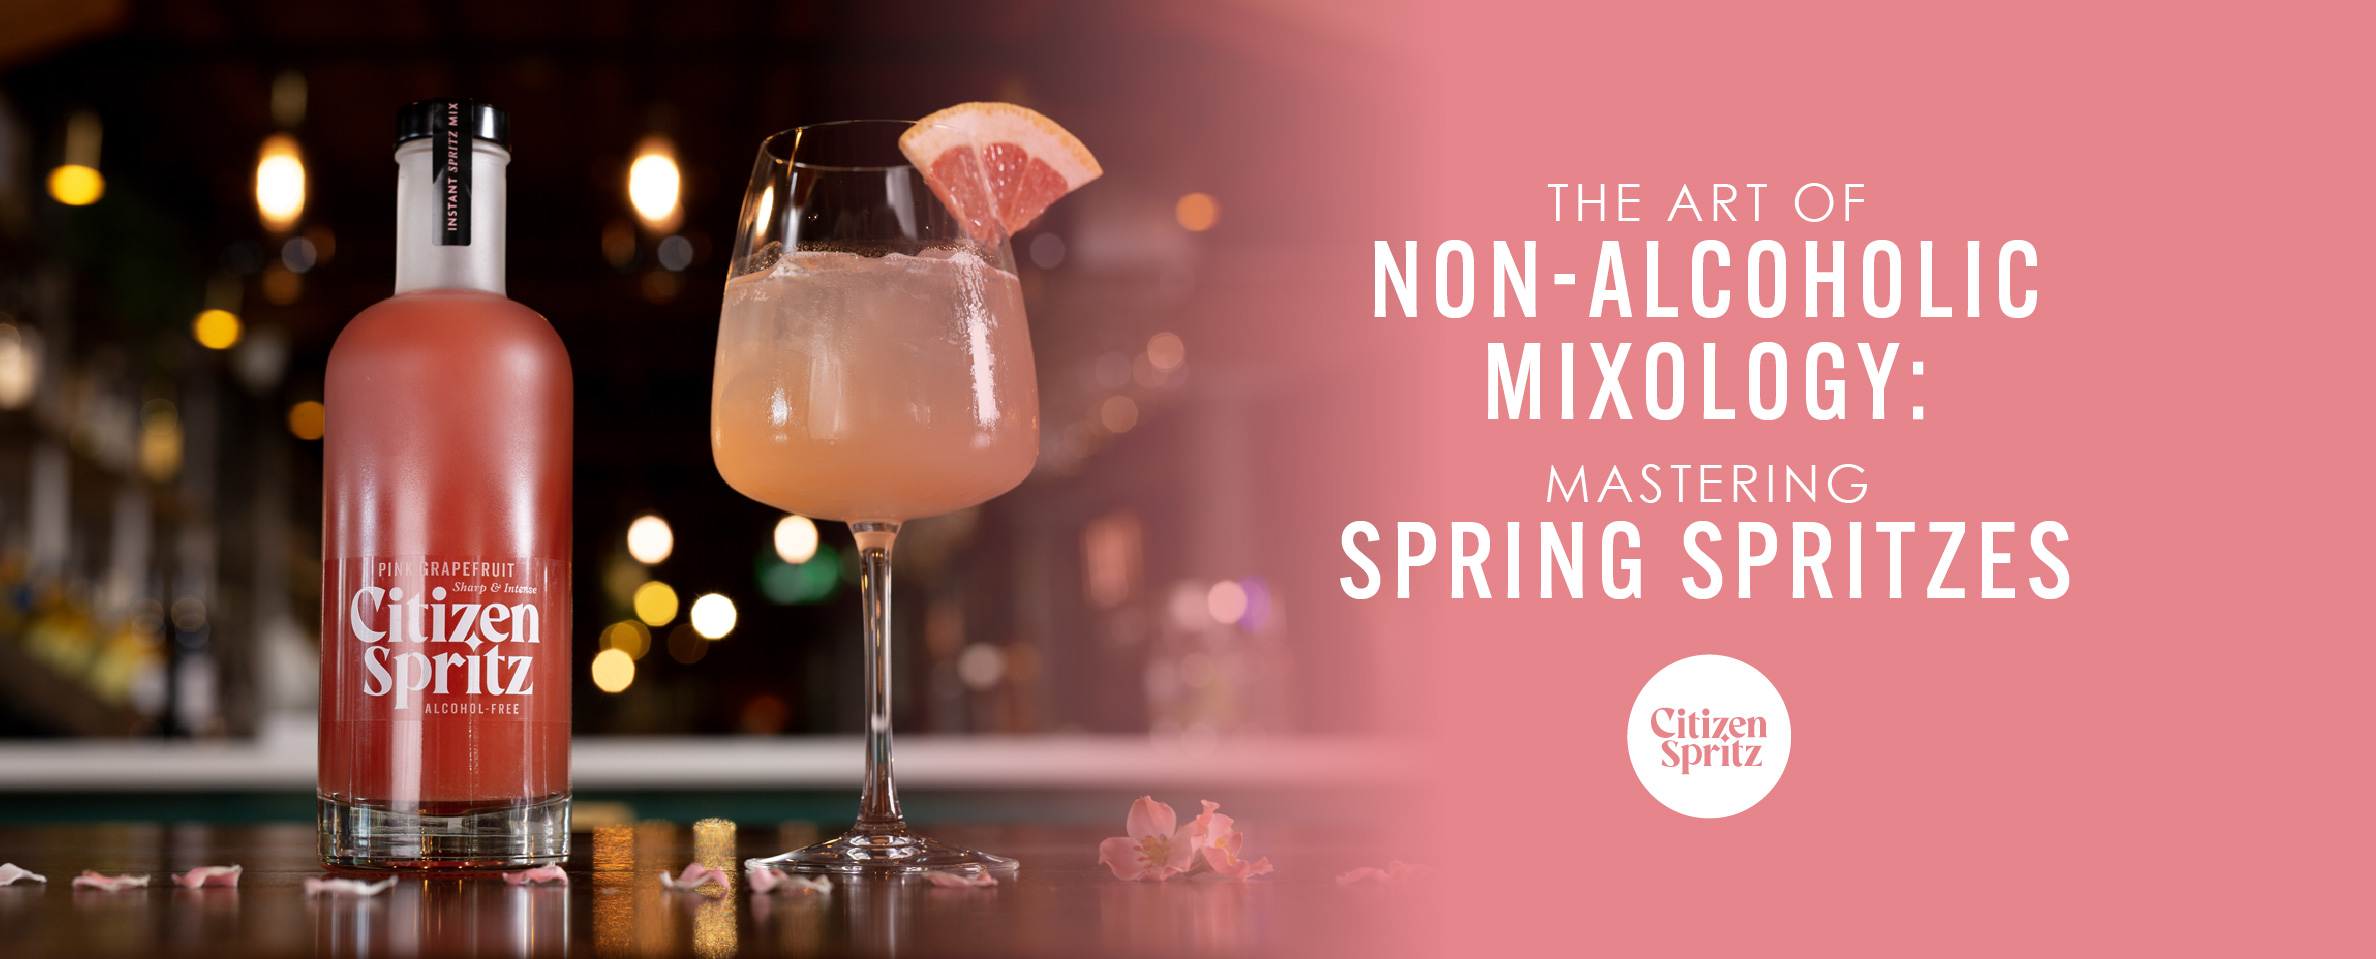 Assorted Citizen Spritz non-alcoholic beverages artfully arranged with fresh spring garnishes, highlighting the vibrant colors and natural ingredients used in non-alcoholic mixology.